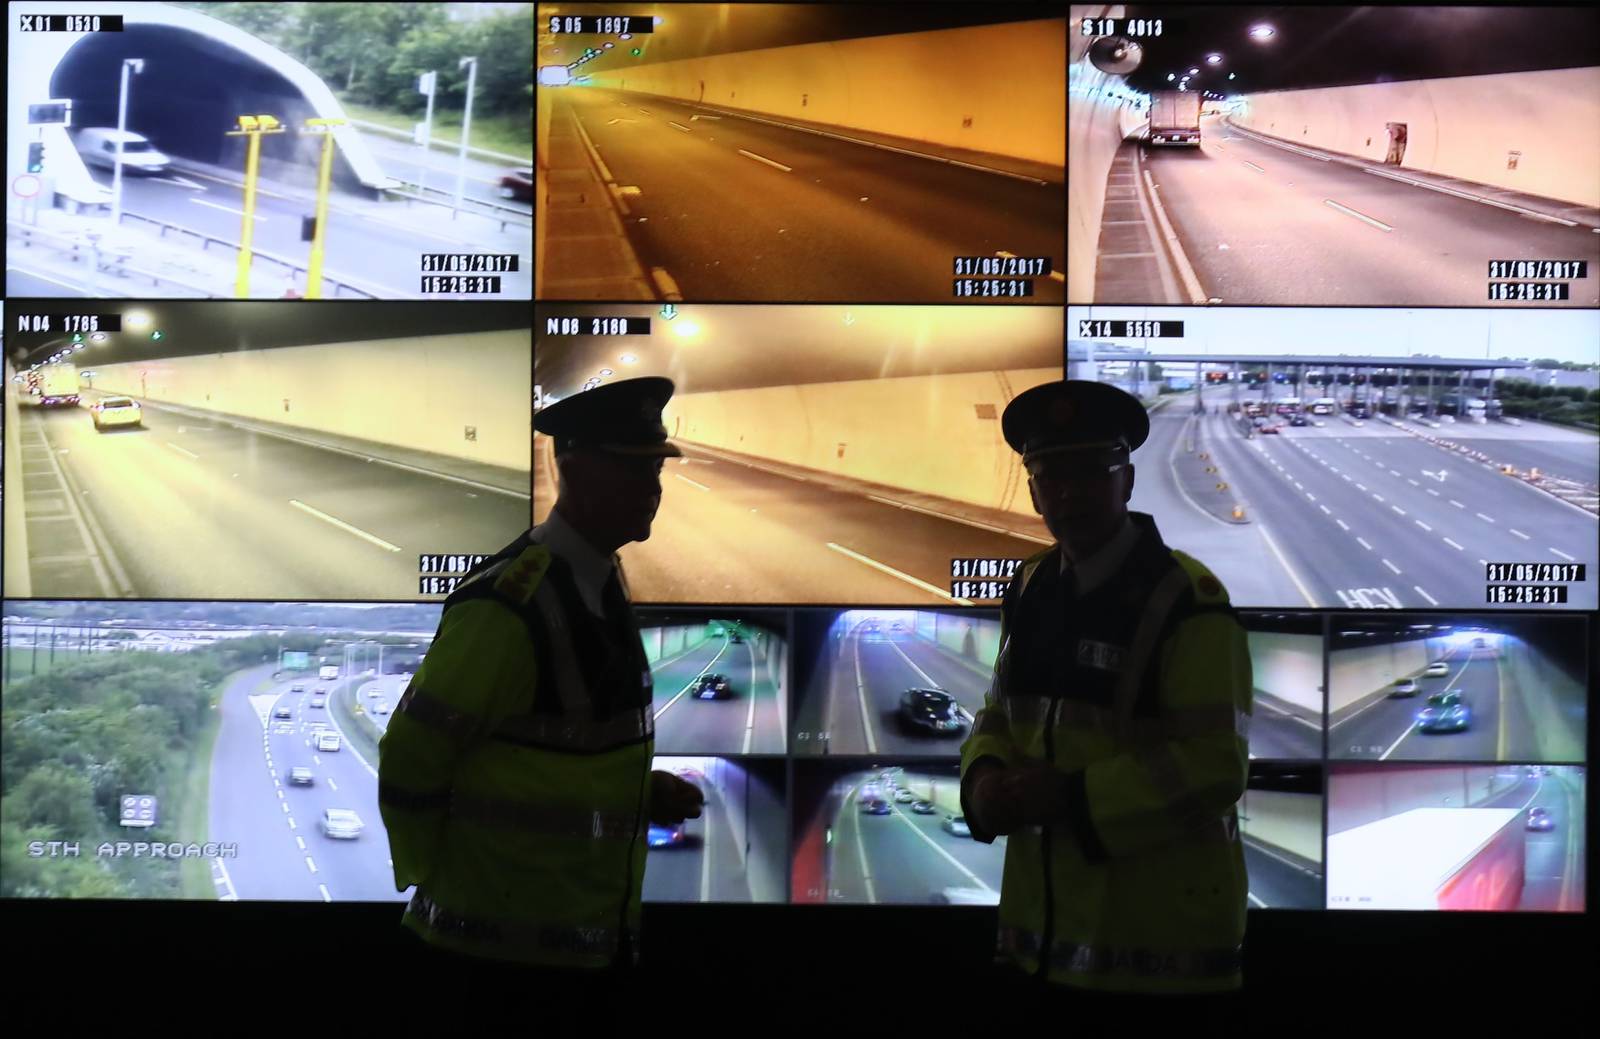 Garda Officers in the control room at the Dublin Tunnel headquarters on the speed camera enforcement system which is set to go live on June 1, 2017. PRESS ASSOCIATION Photo. Picture date: Wednesday May 31, 2017. The average speed camera enforcement system monitors a driver's average speed while through the Dublin Tunnel and if a driver is above the 80 km/h speed limit the driver will be in violation and enforcement penalties will apply. Photo credit should read: Niall Carson/PA Wire